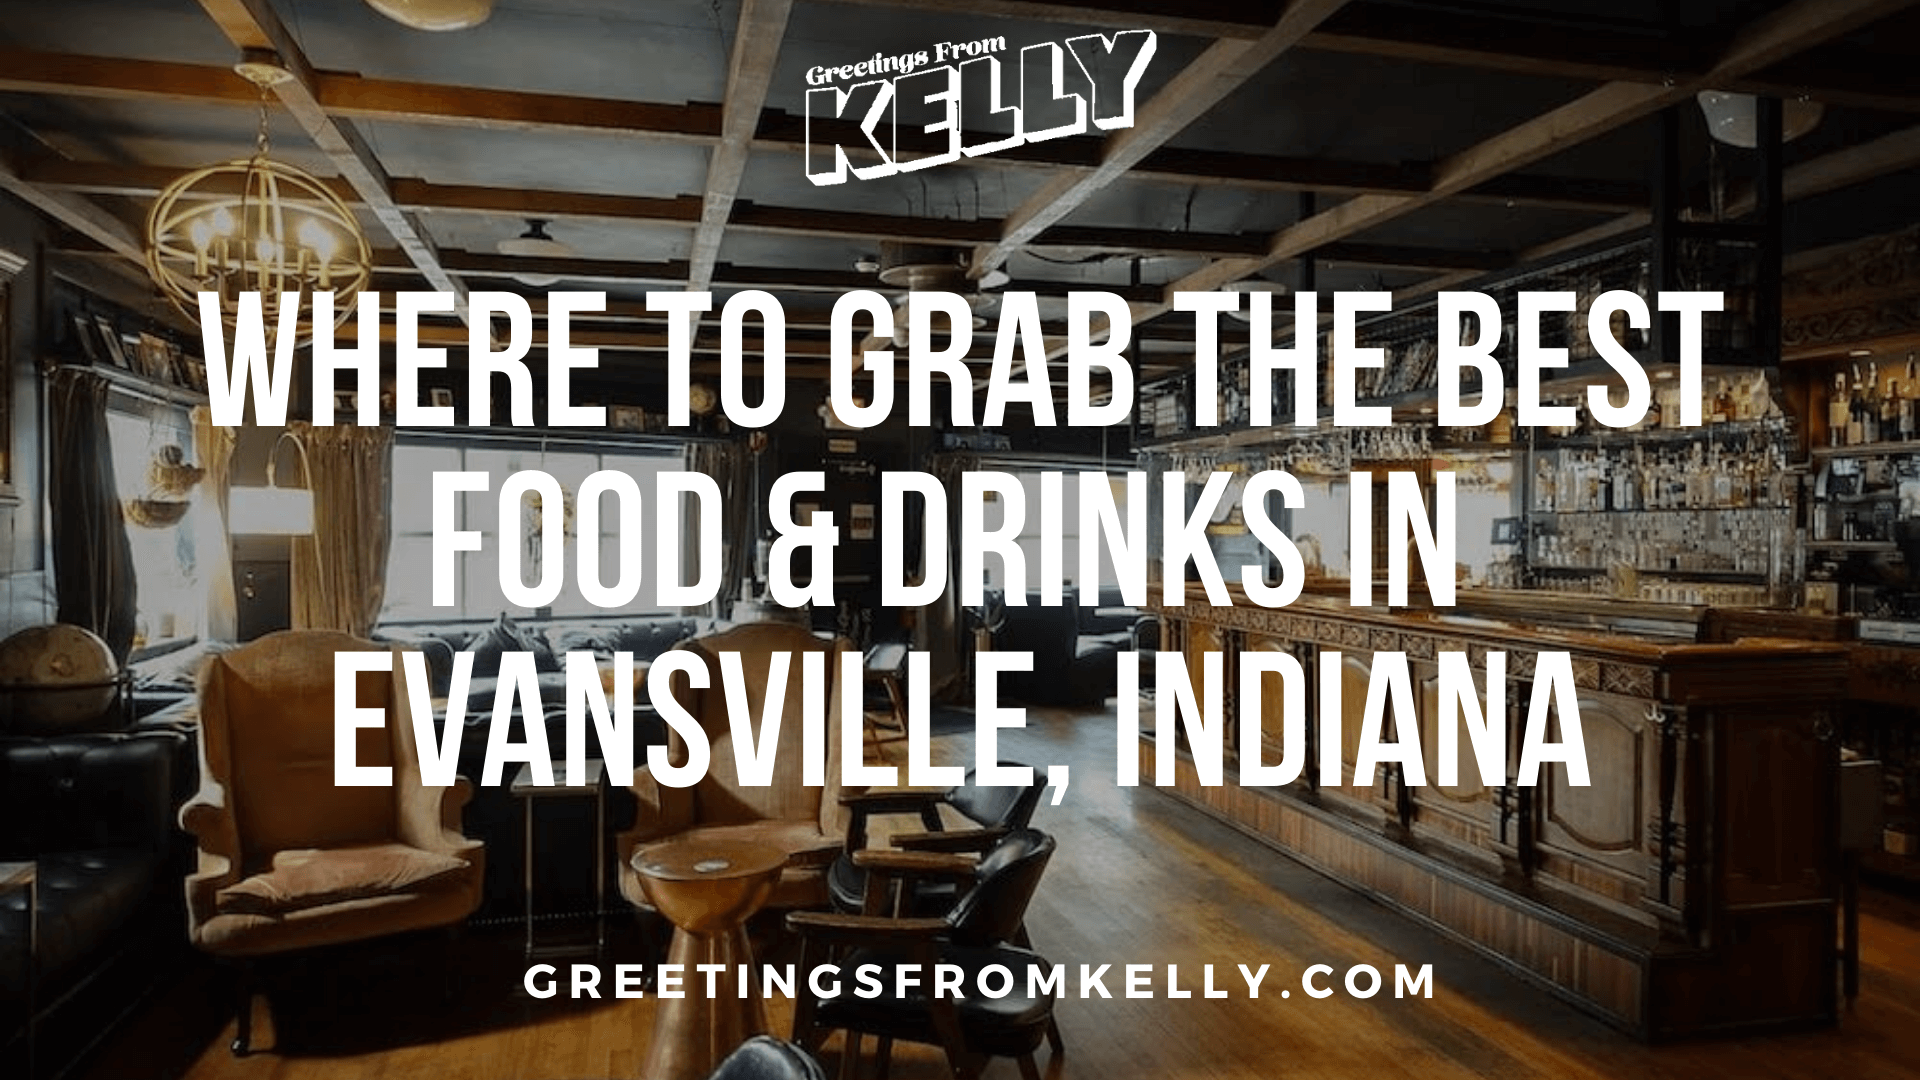 Where to Grab the Best Food & Drinks in Evansville